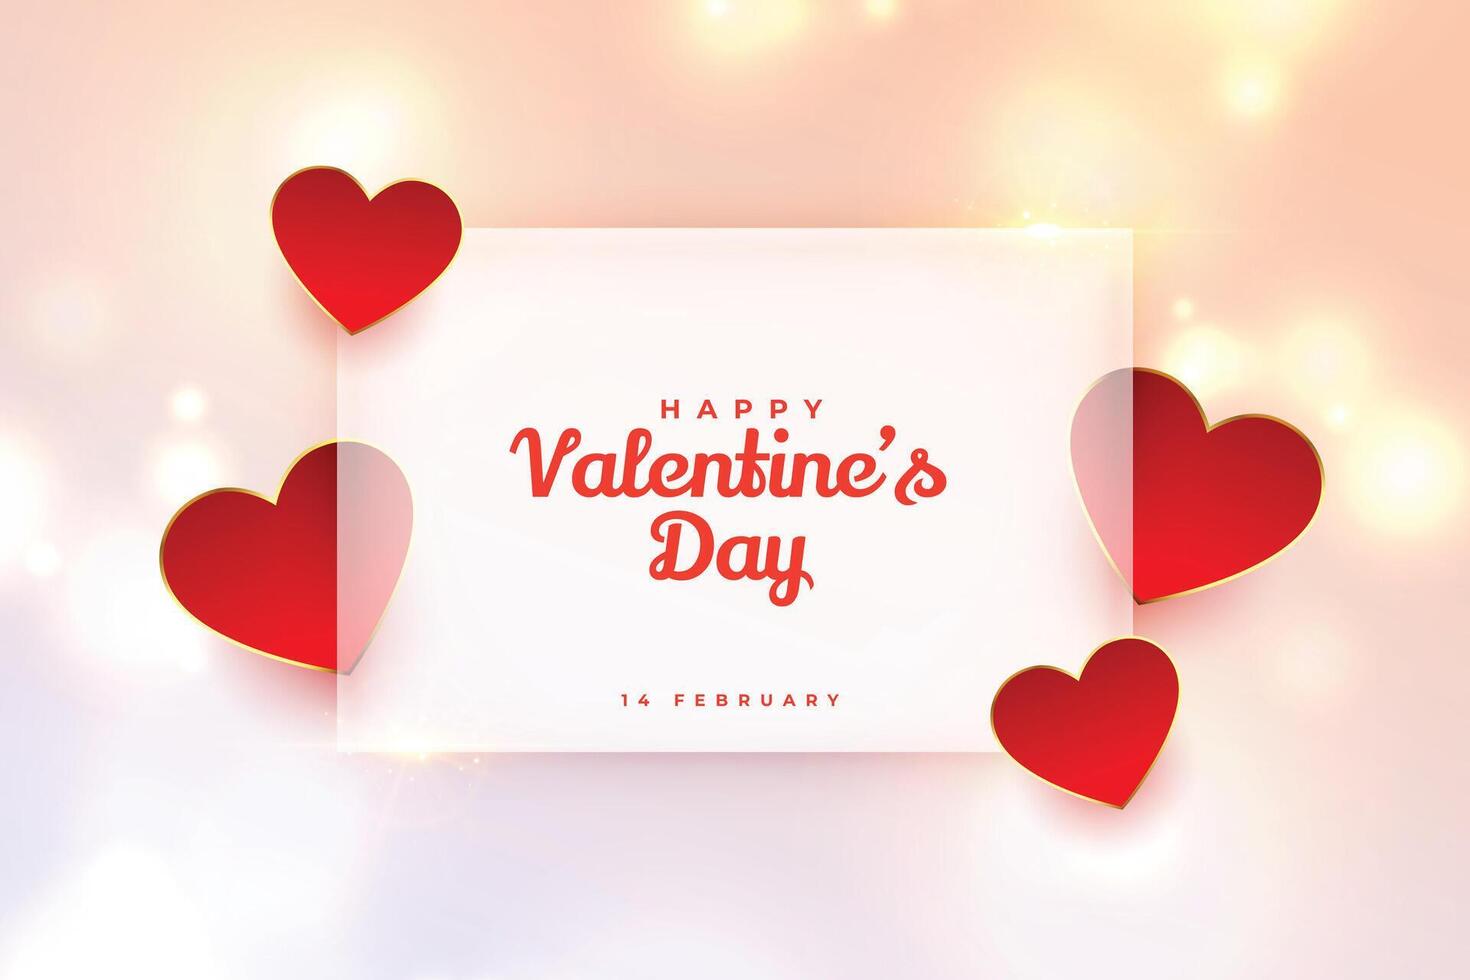 nice hearts for valentines day on shiny background vector